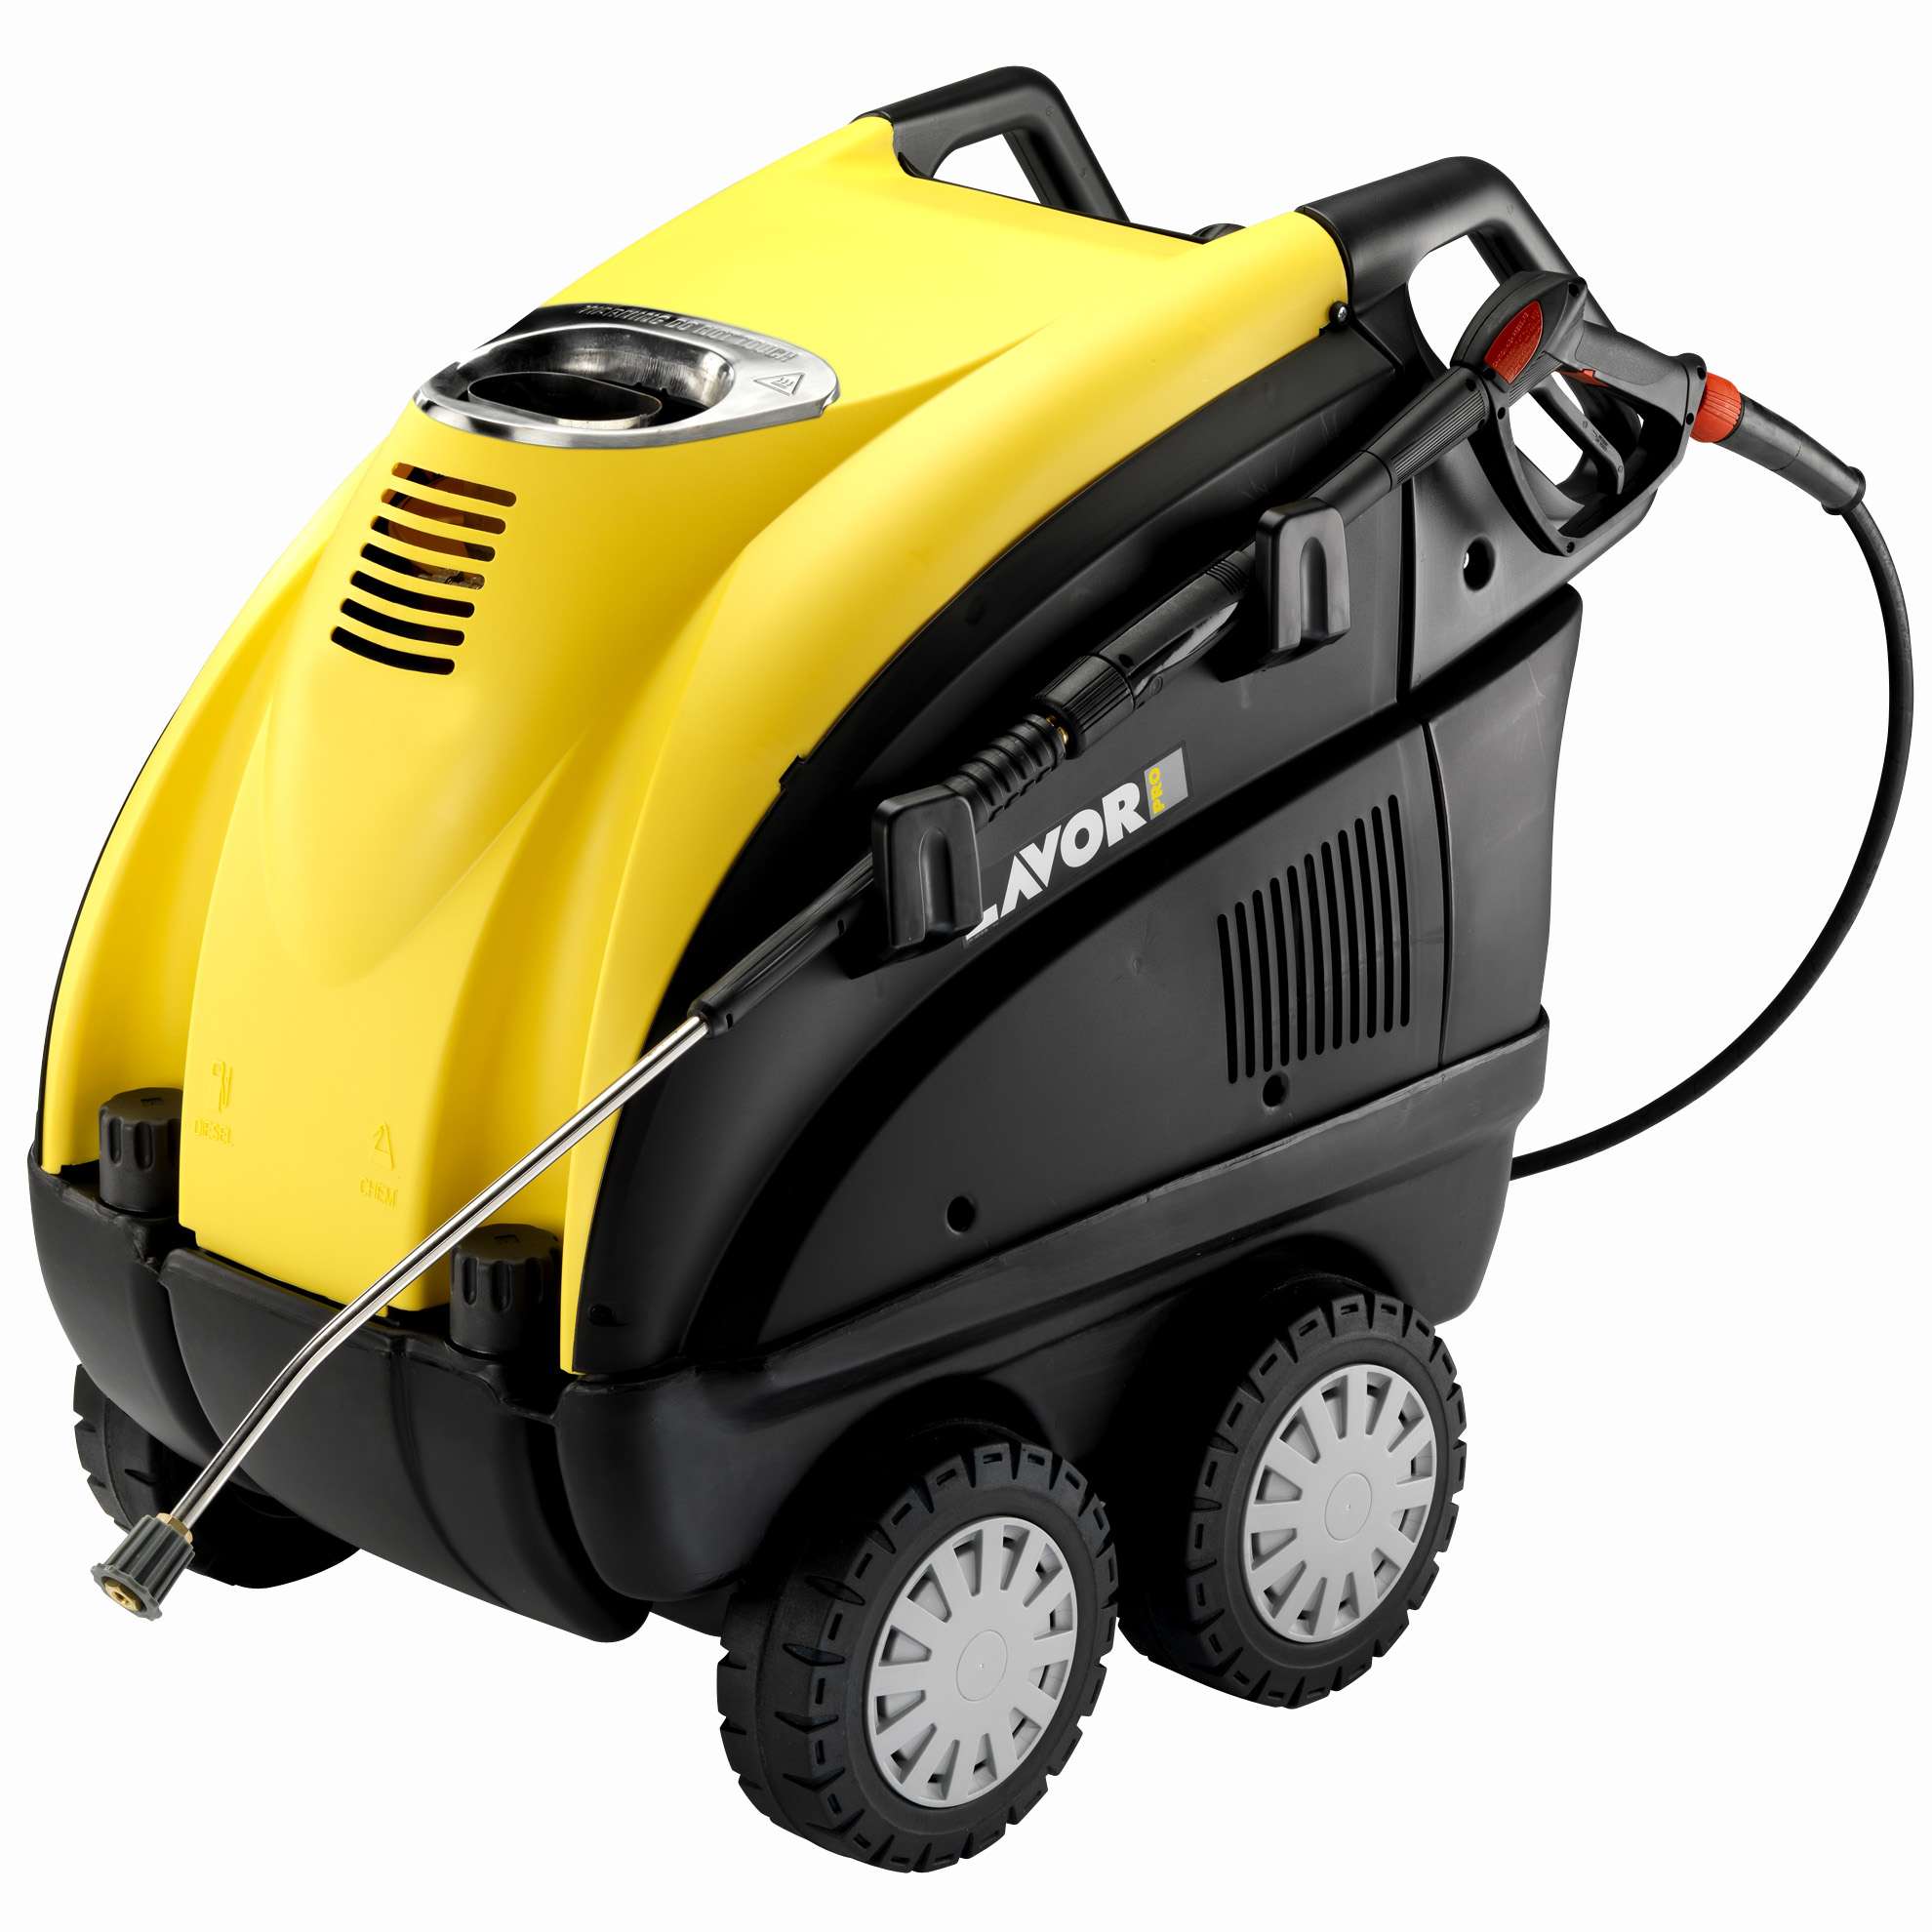 Commercial hot water pressure washers